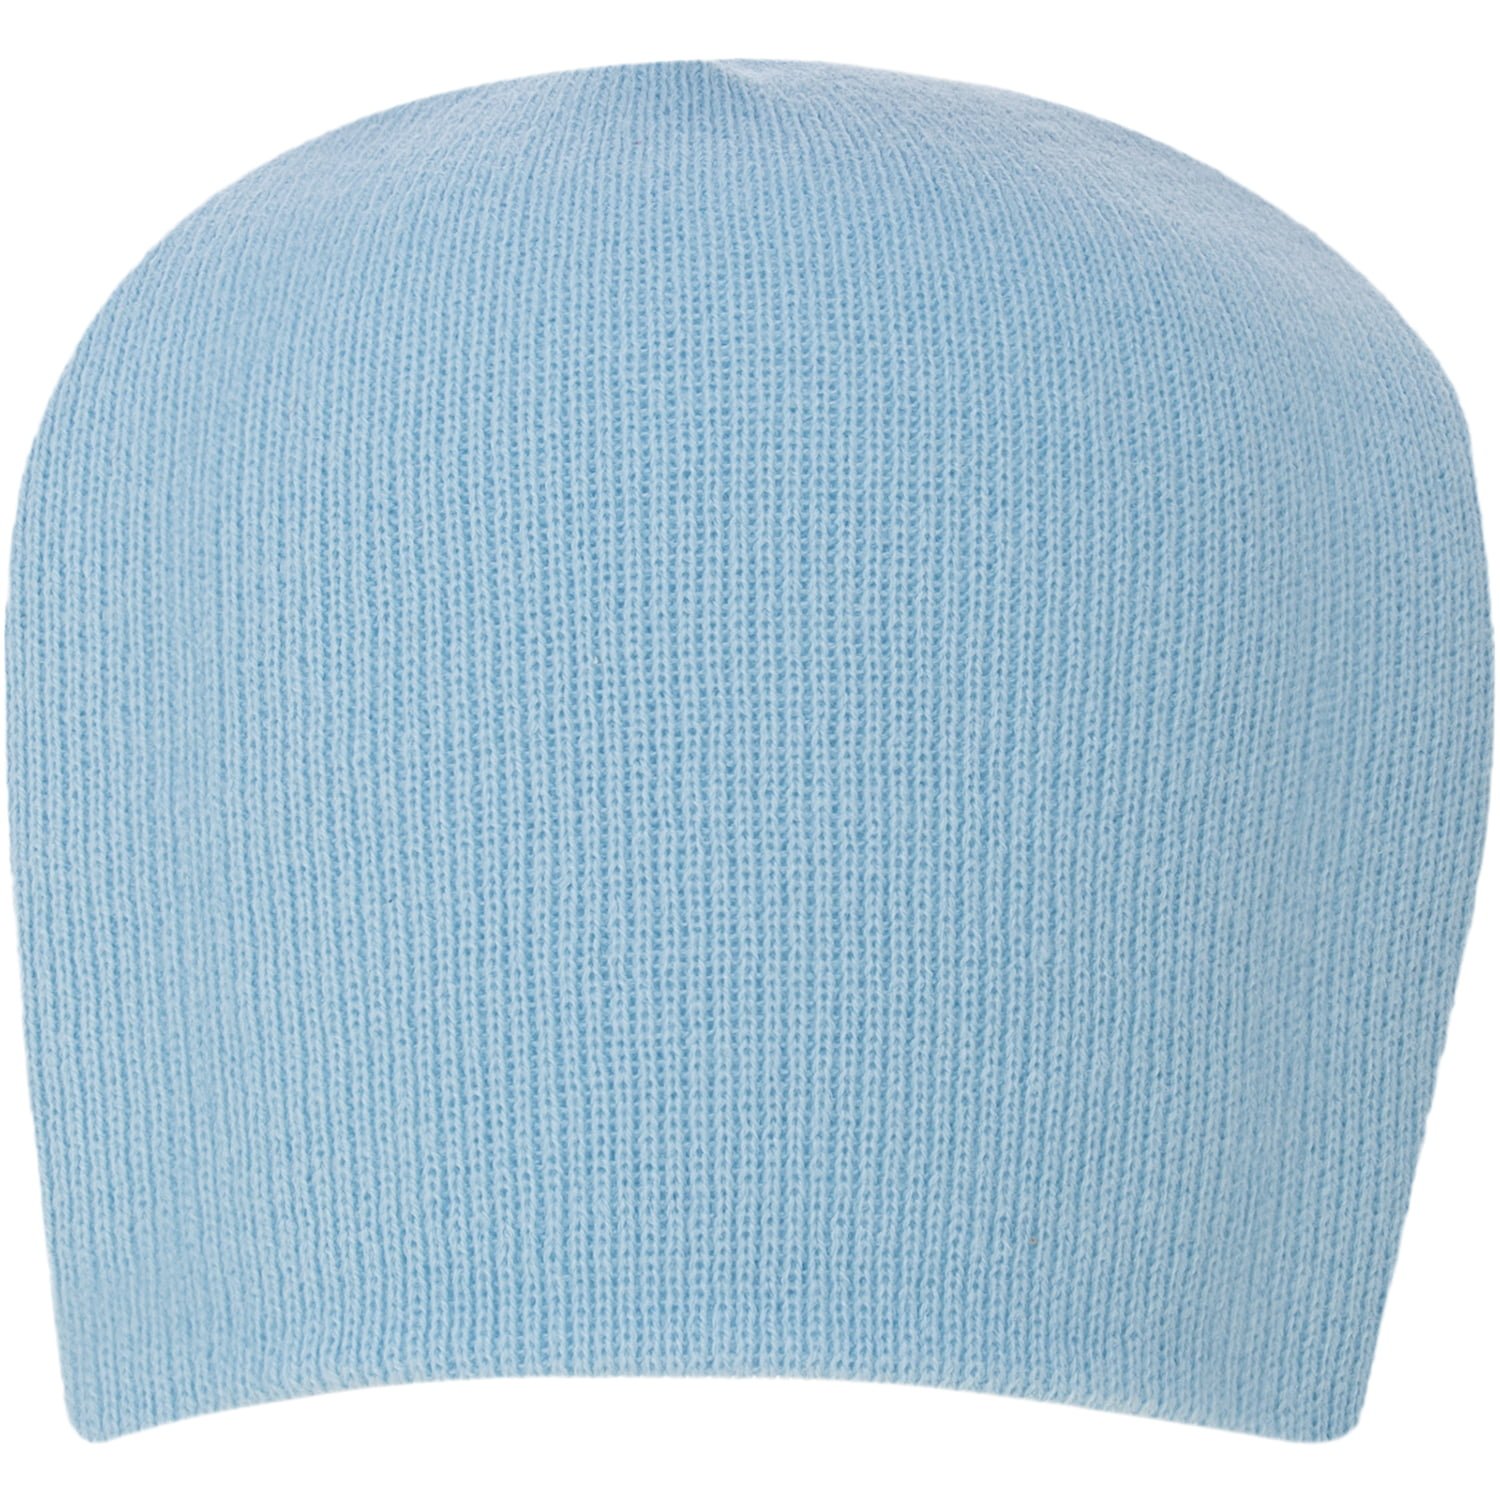 12pcs Solid Sky Blue Beanie Winter Knit Hat - Made in USA - Single Piece